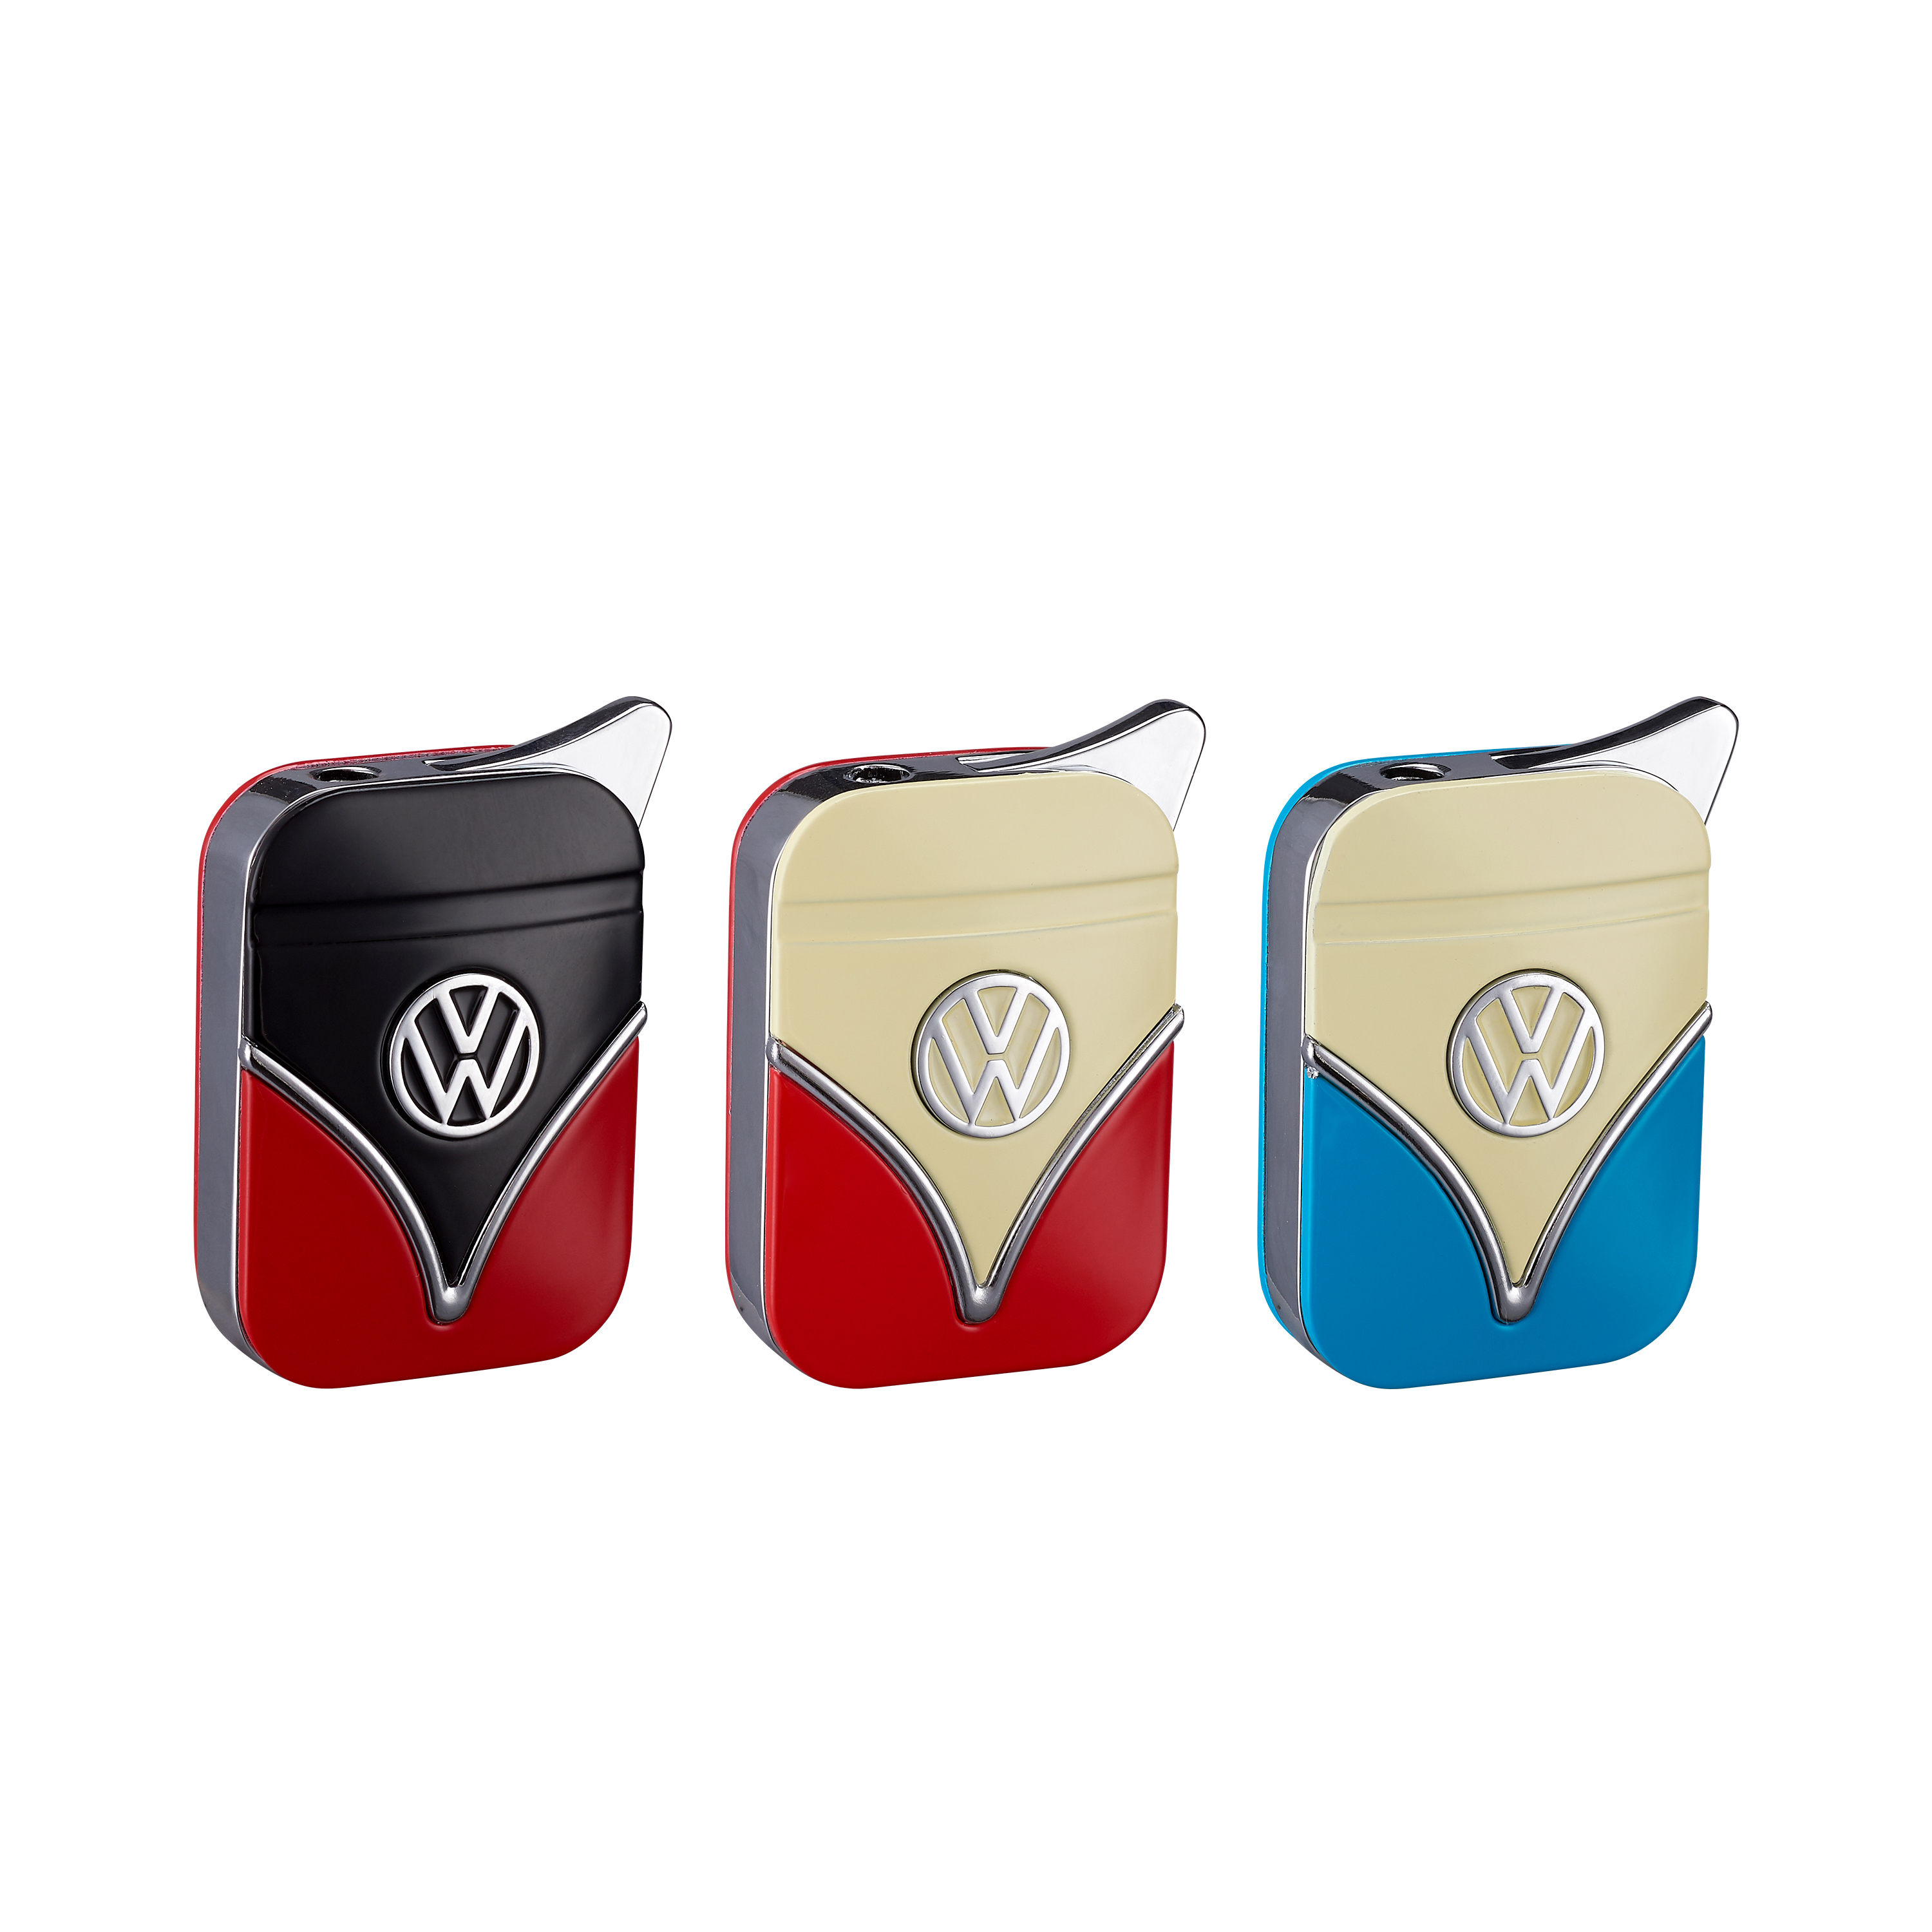 VW T1 BUS LIGHTERS IN GIFT BOX, SET OF 8 IN 3 COLORS IN DISPLAY.